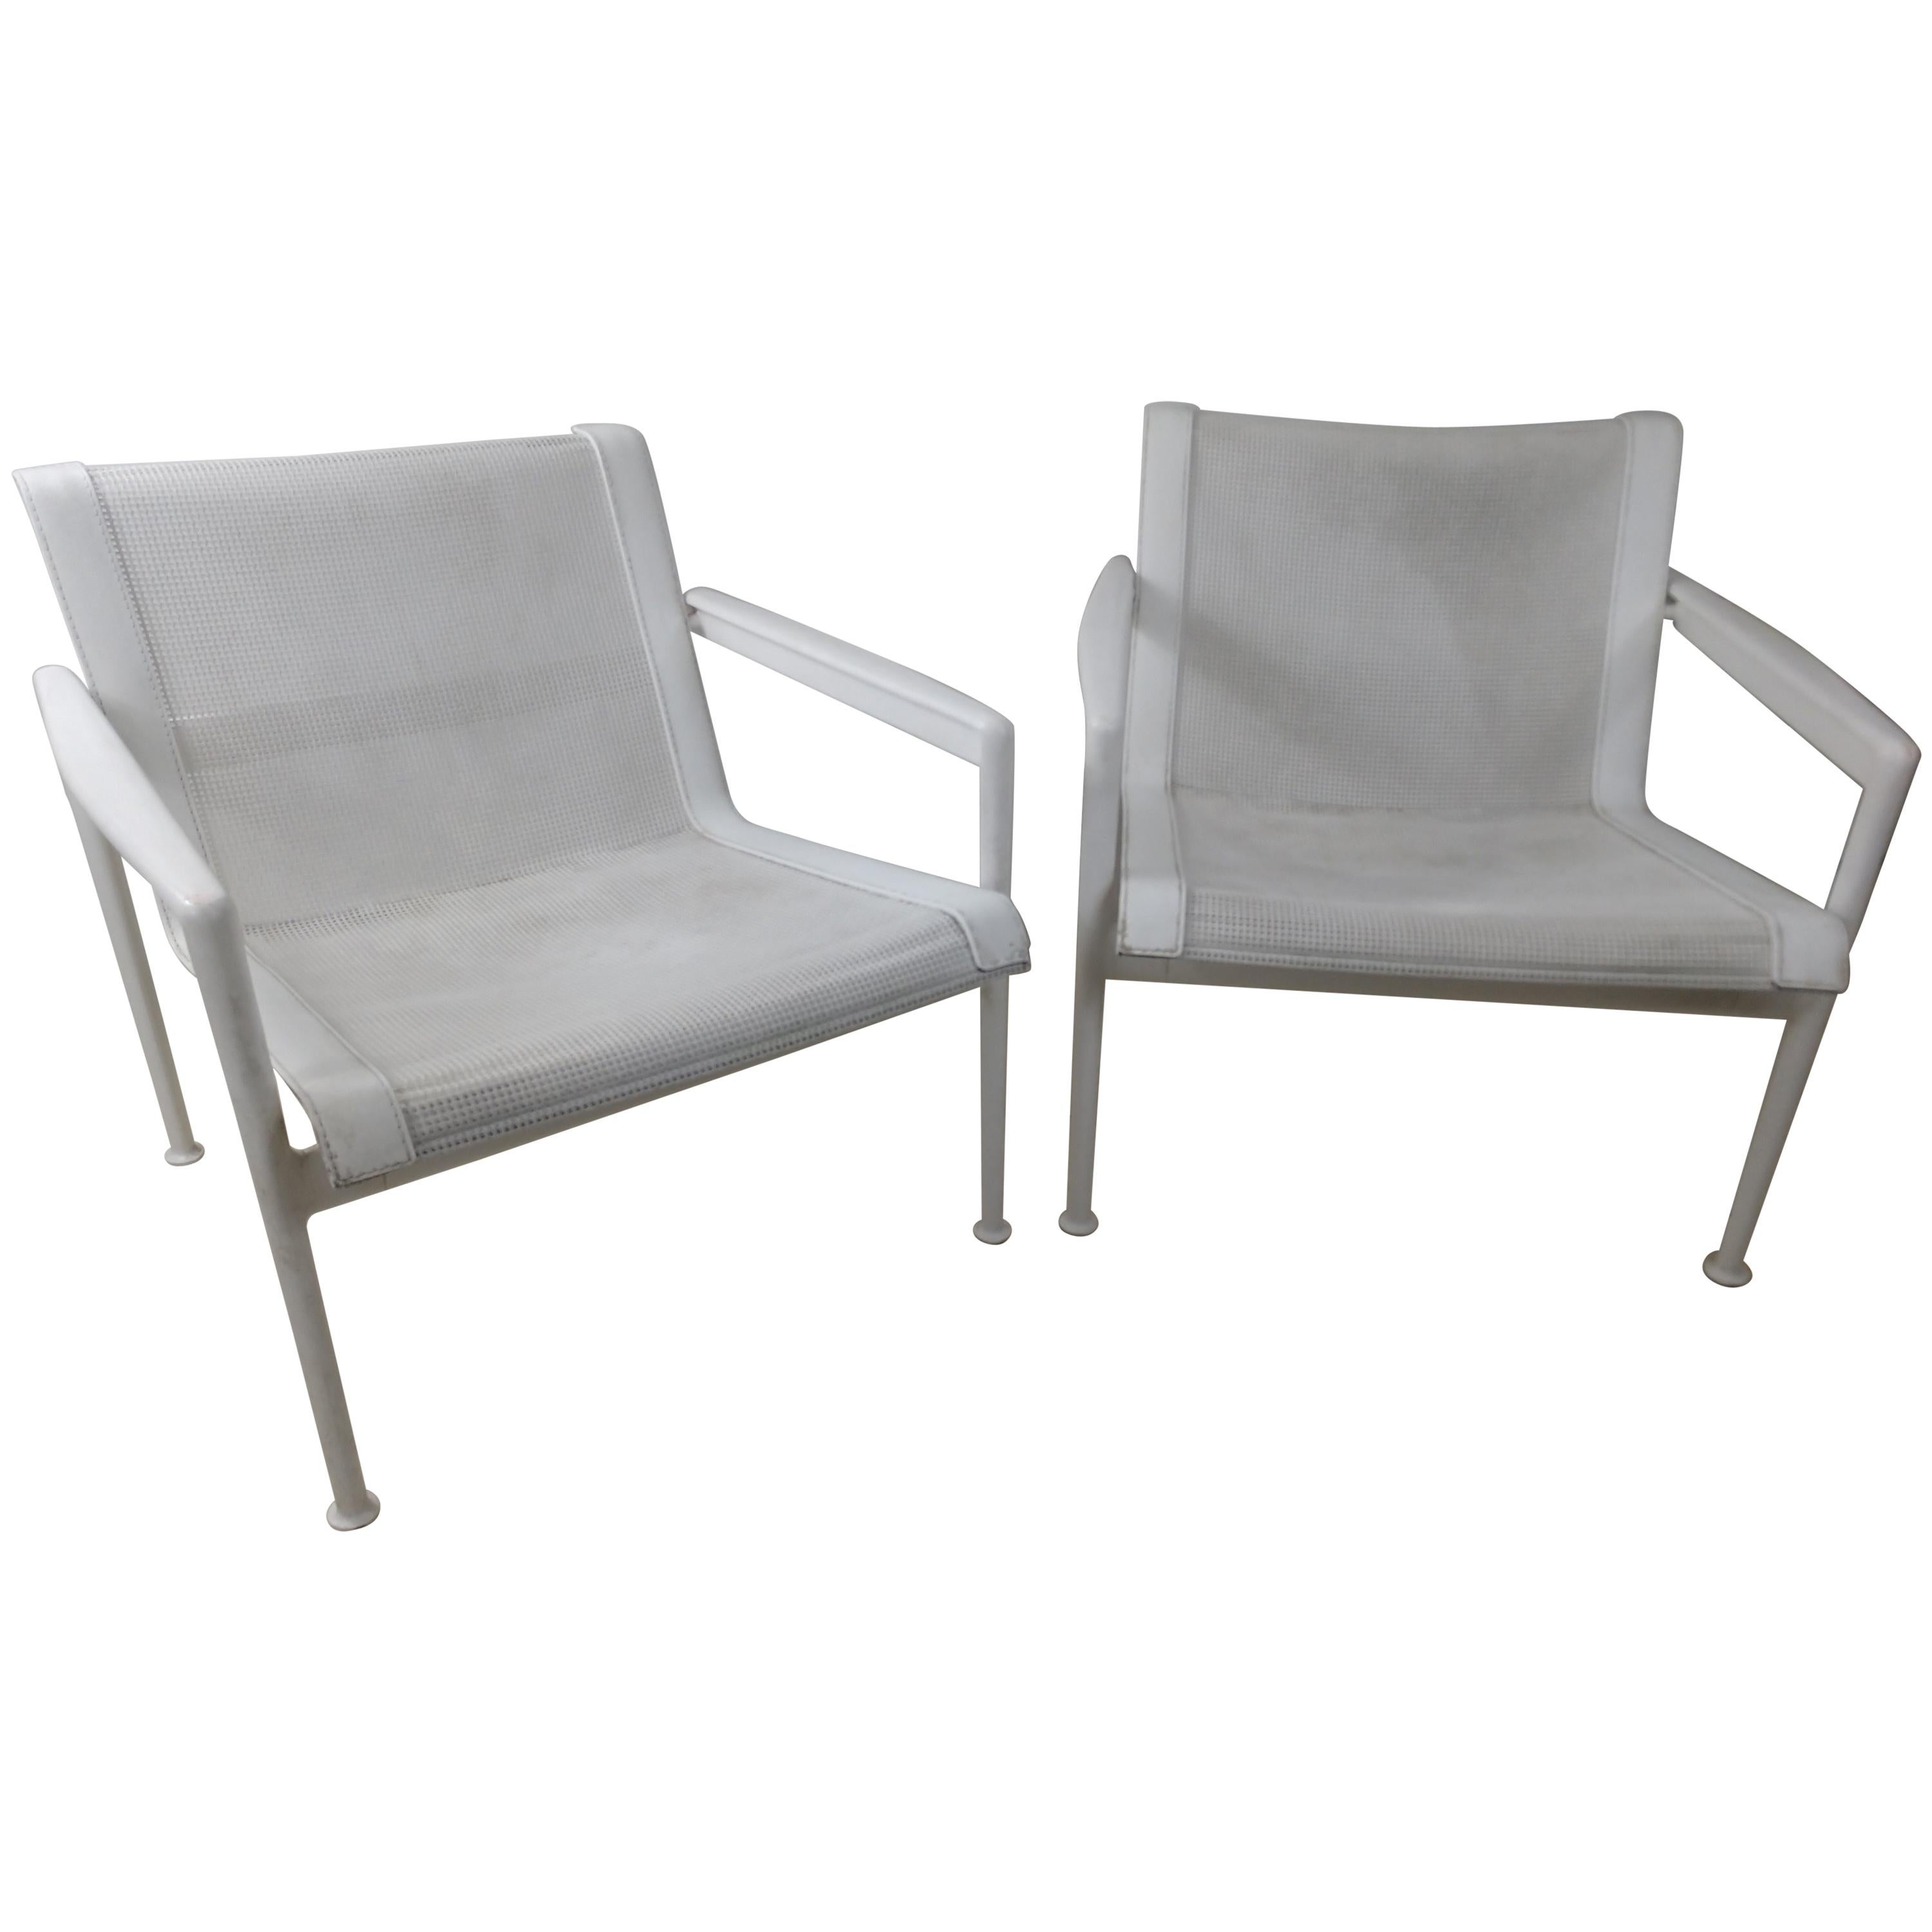 Pair of Richard Schultz Outdoor Lounge Chairs for Knoll